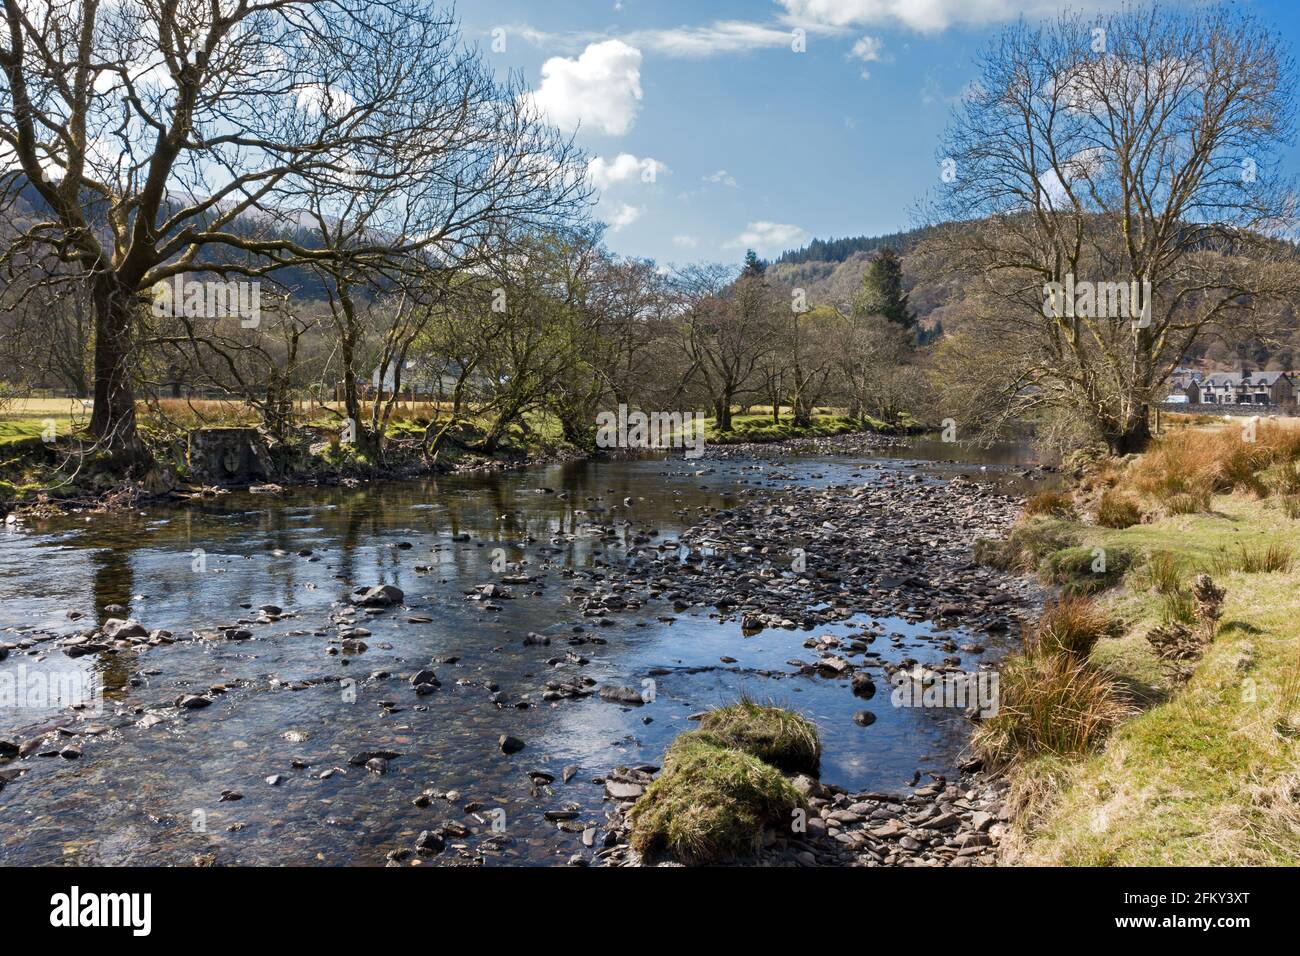 Seen here is the Afon (English: River) Lledr in the Lledr Valley passing near Dolwyddelan in the Snowdonia National Park. Stock Photo